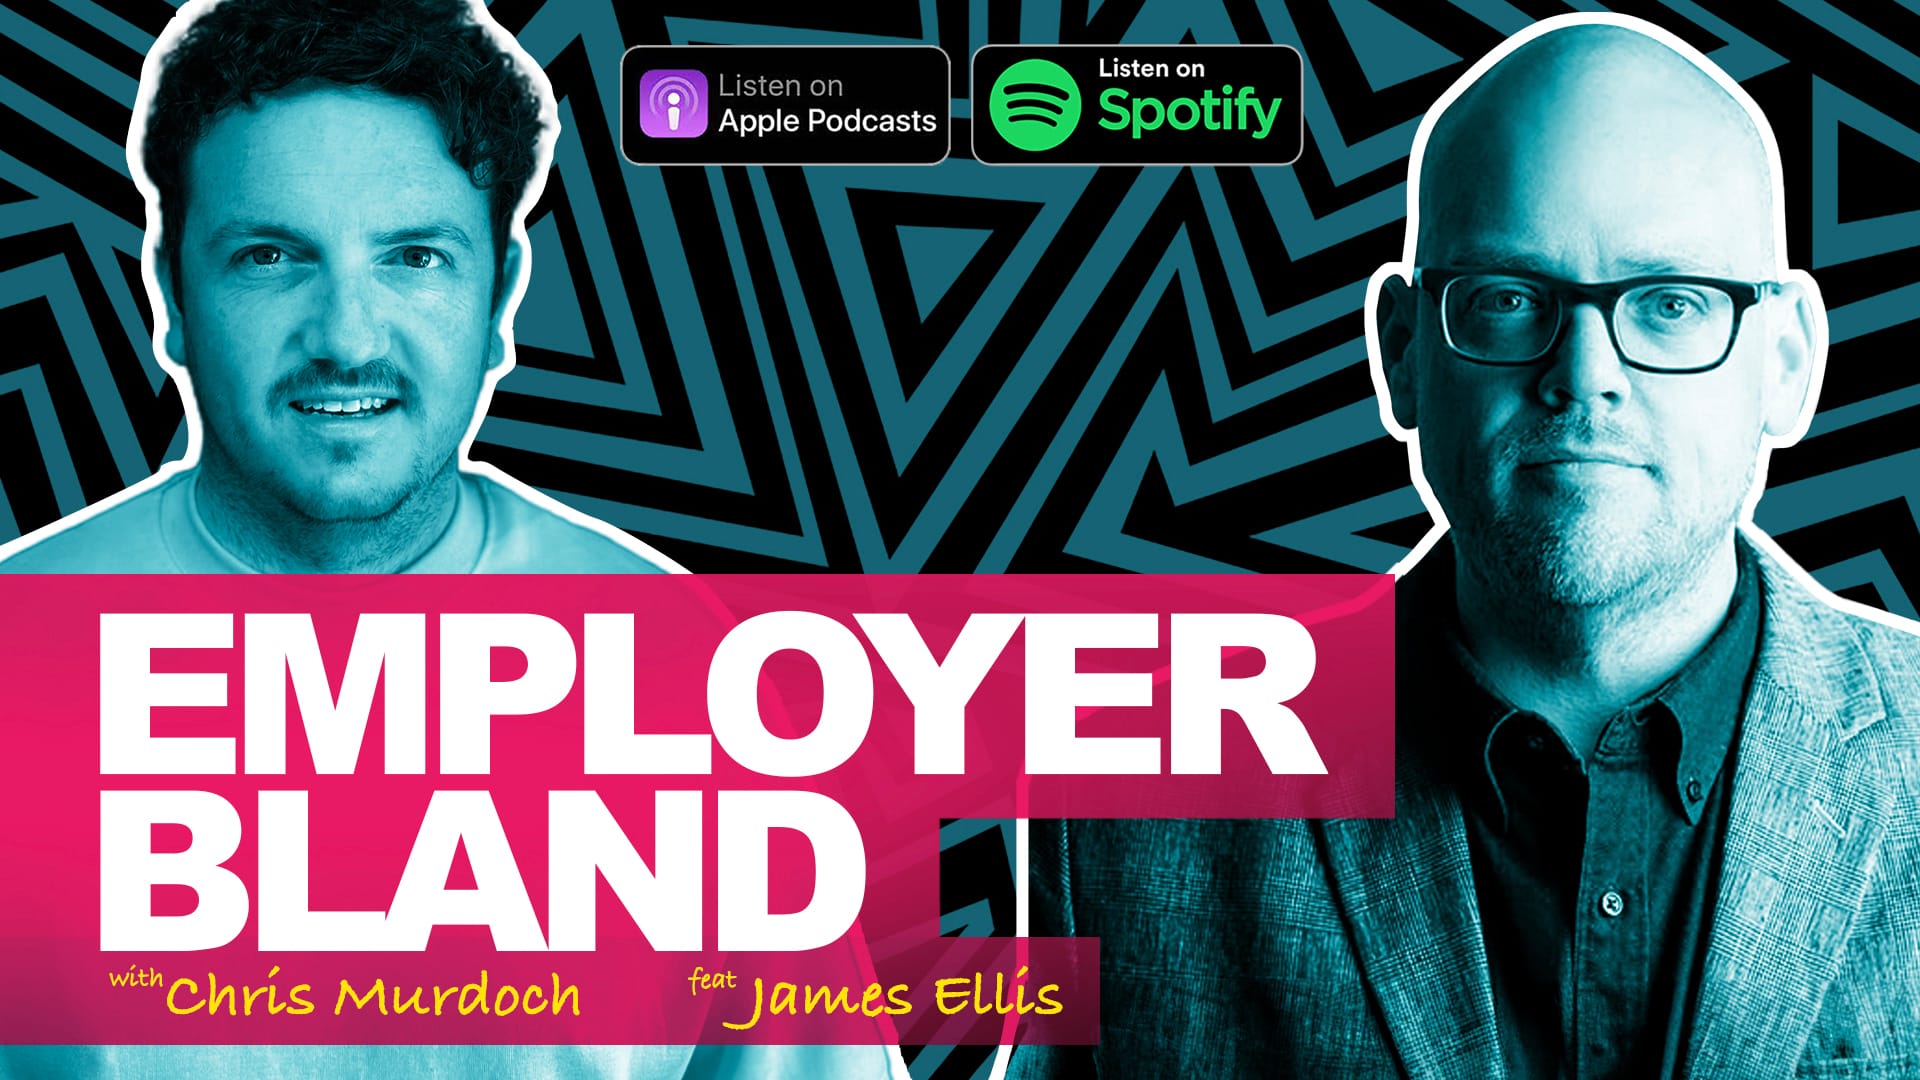 Embracing imperfections and flaws to amplify your employer brand - with guest James Ellis